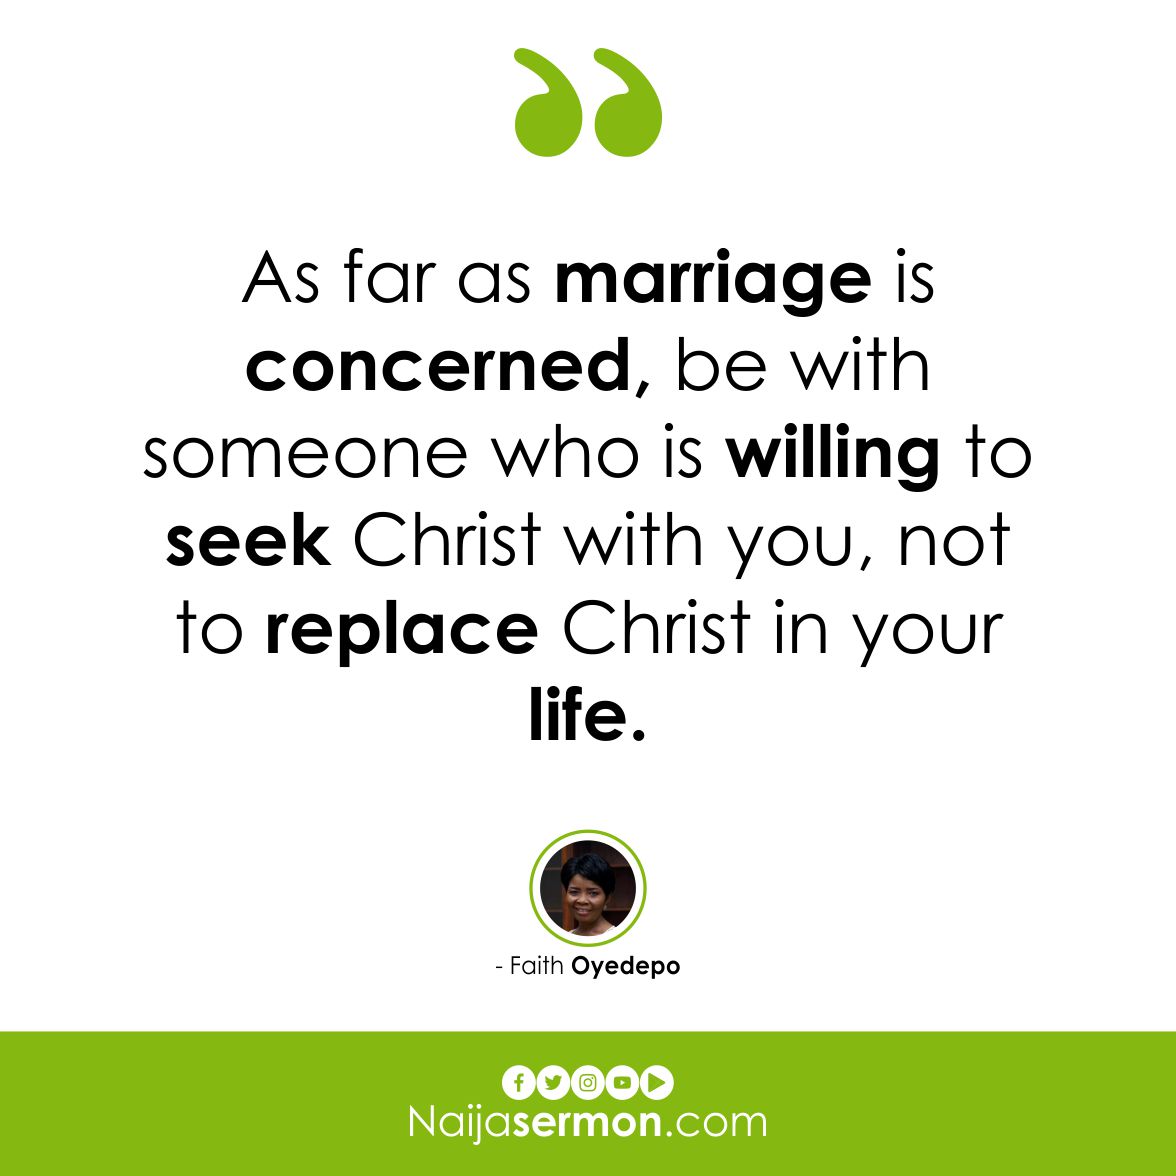 Quote of the Day by Faith Oyedepo 23